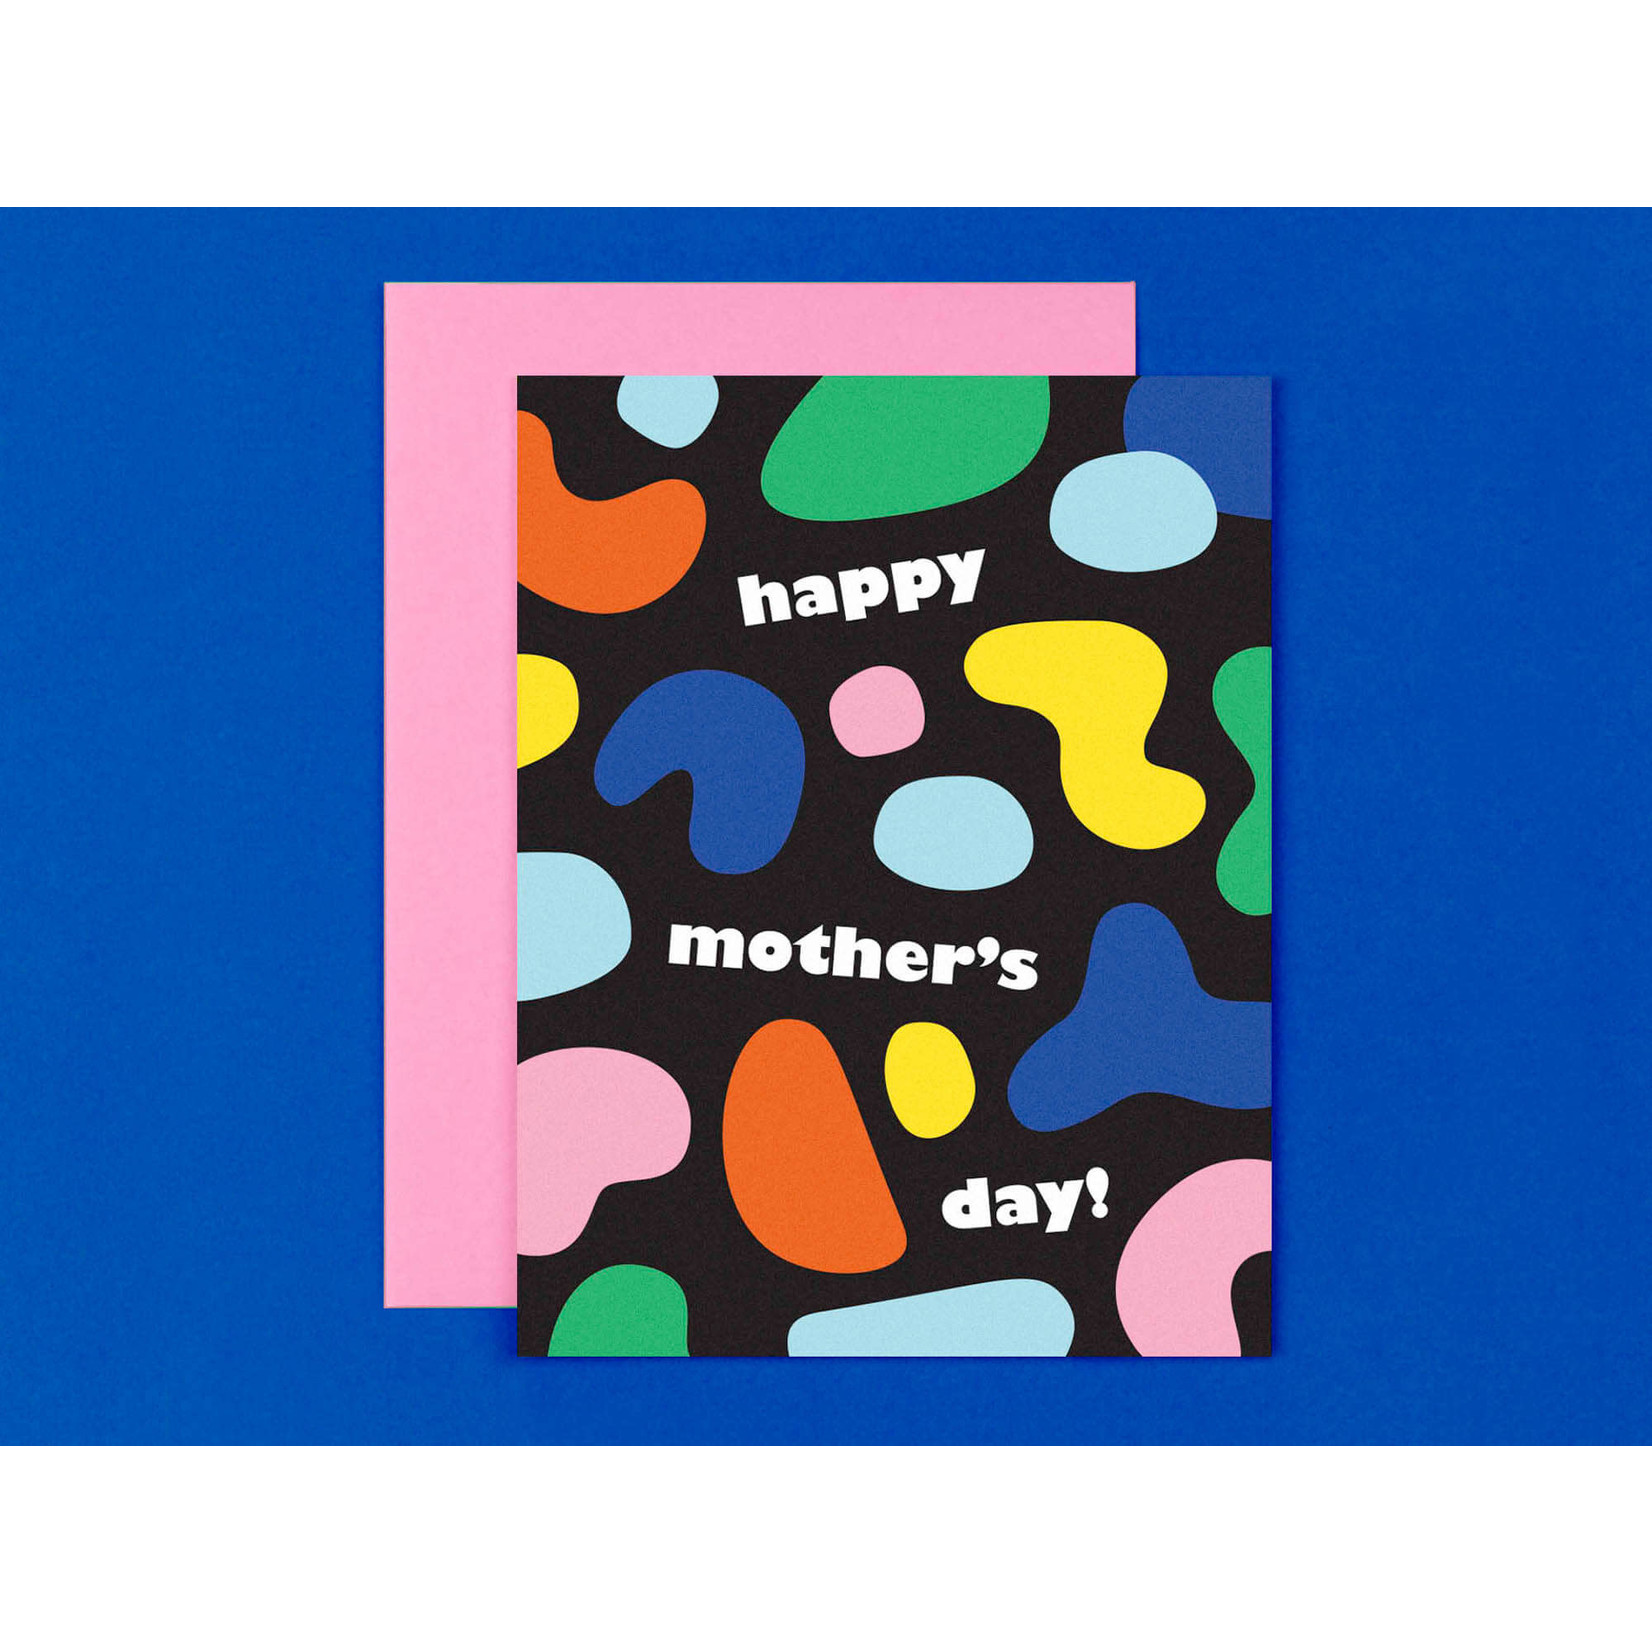 My Darlin' Mother's Day: Abstract Shapes